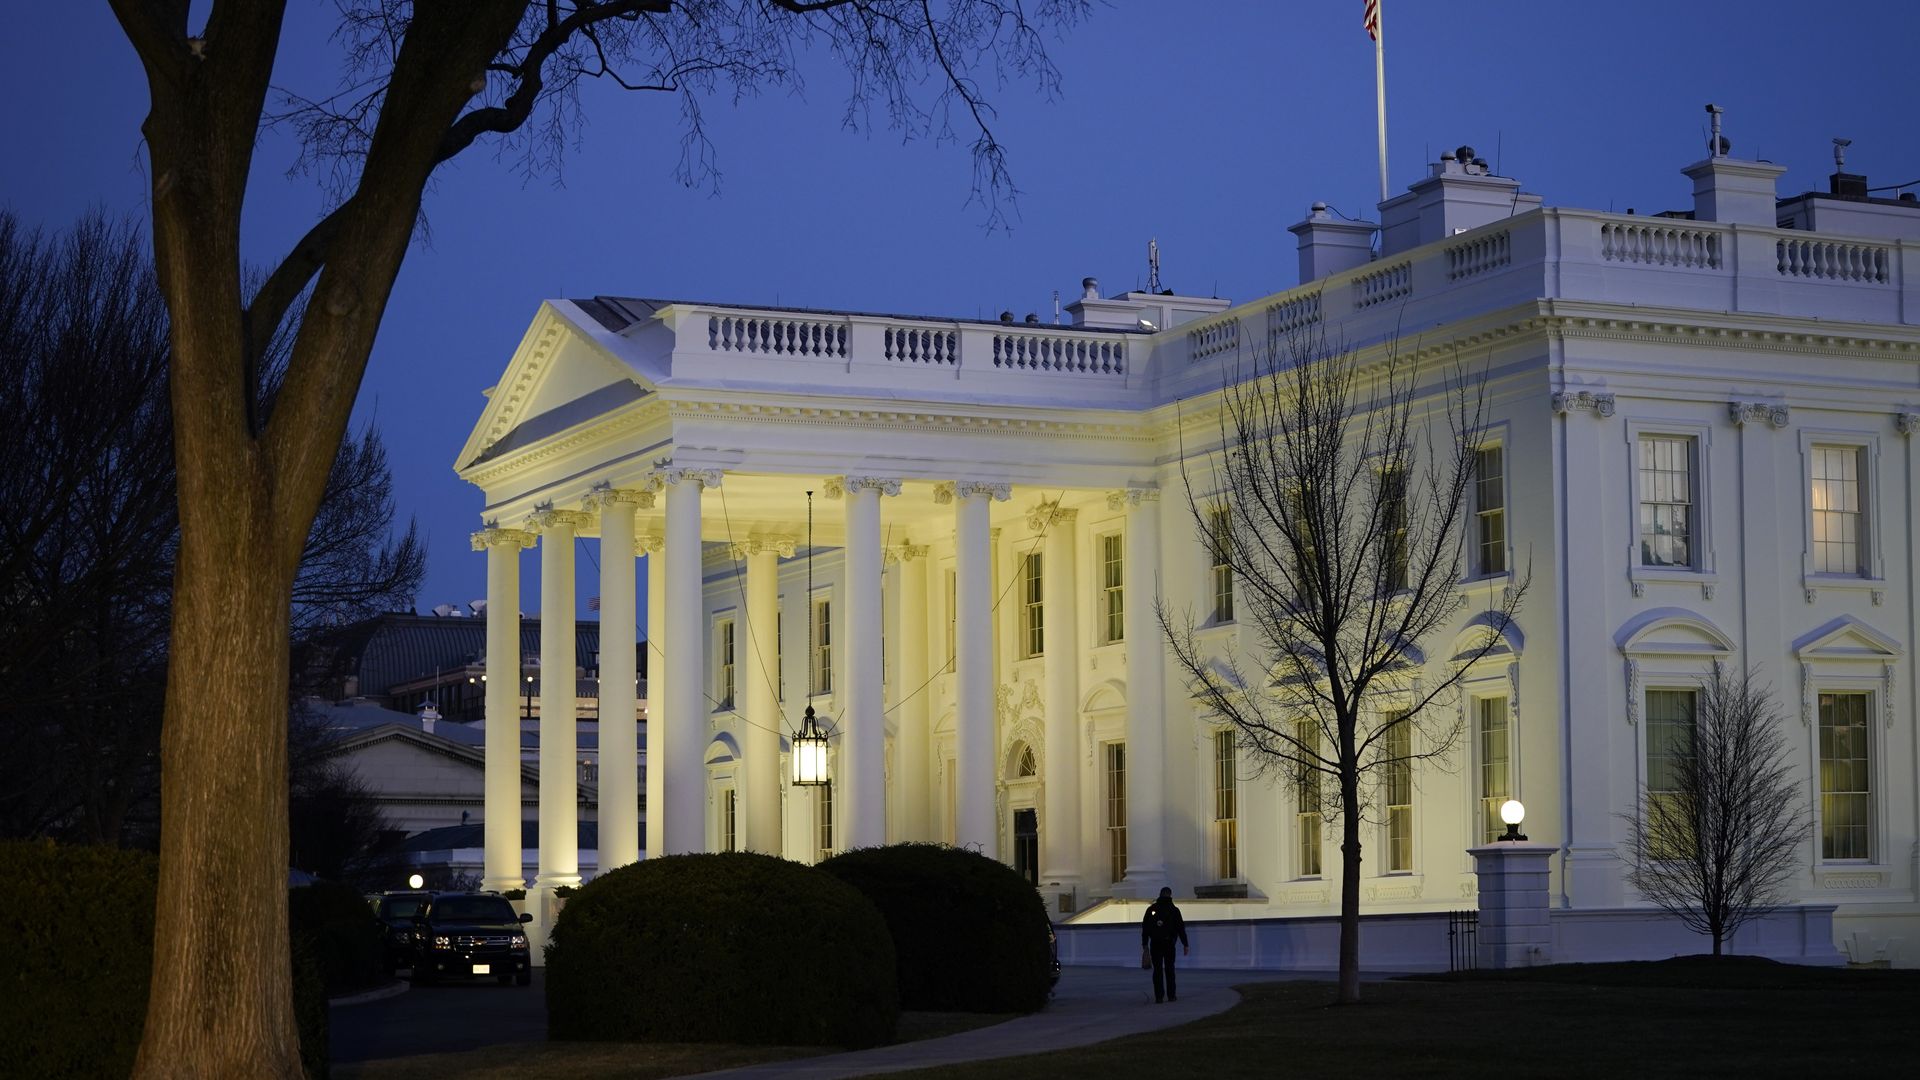 Picture of the White House taken at night